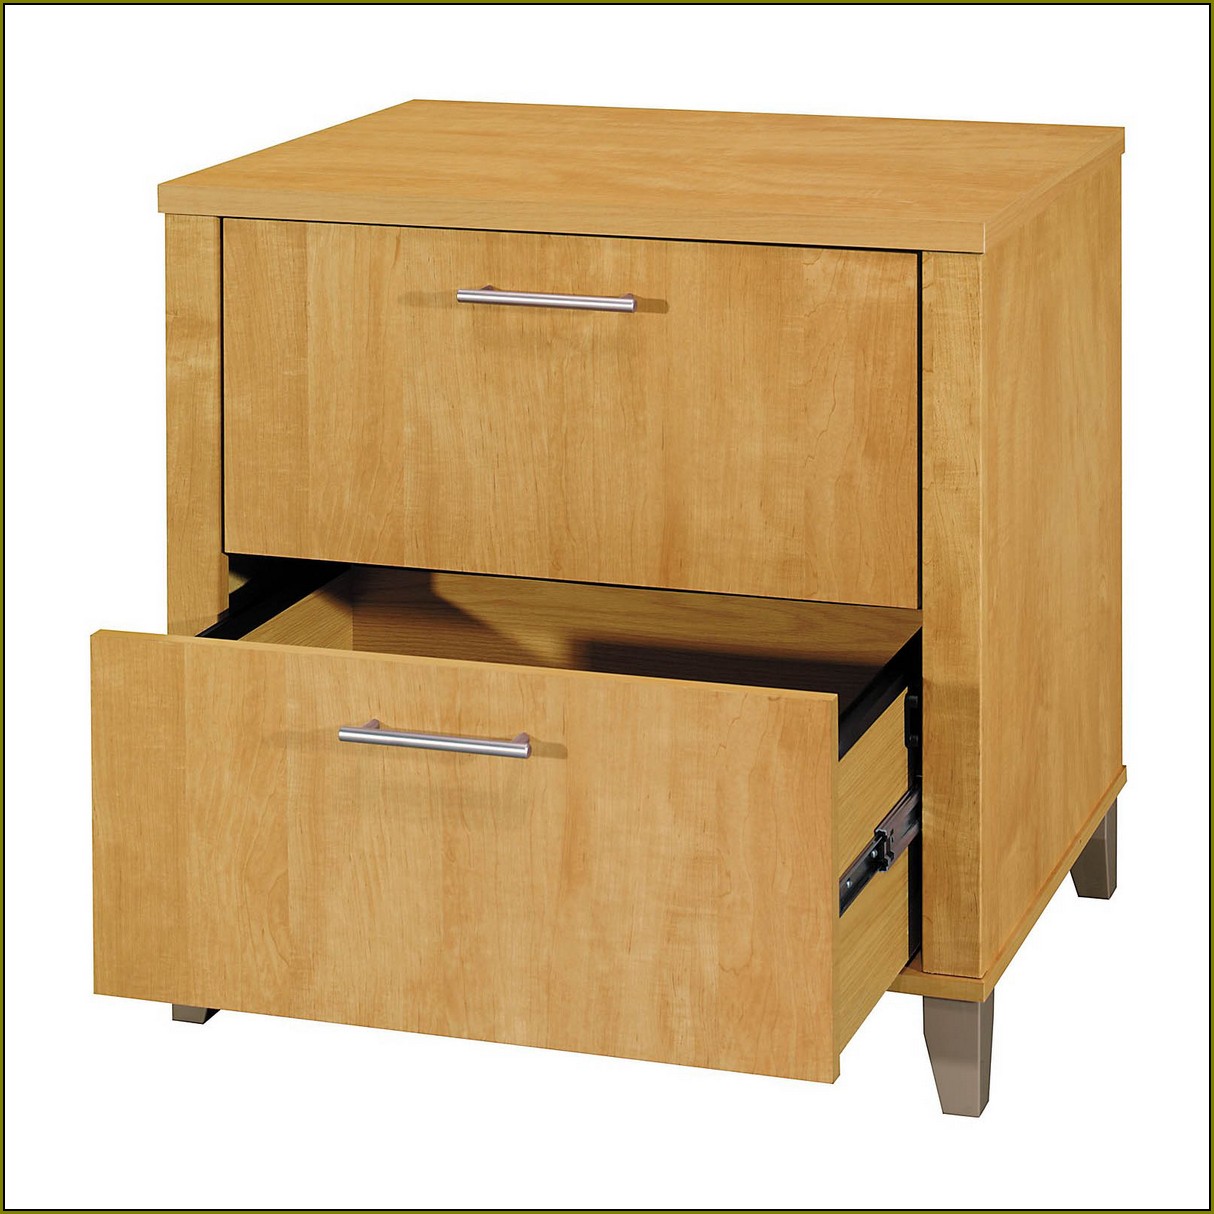 2 Drawer File Cabinets On Wheels